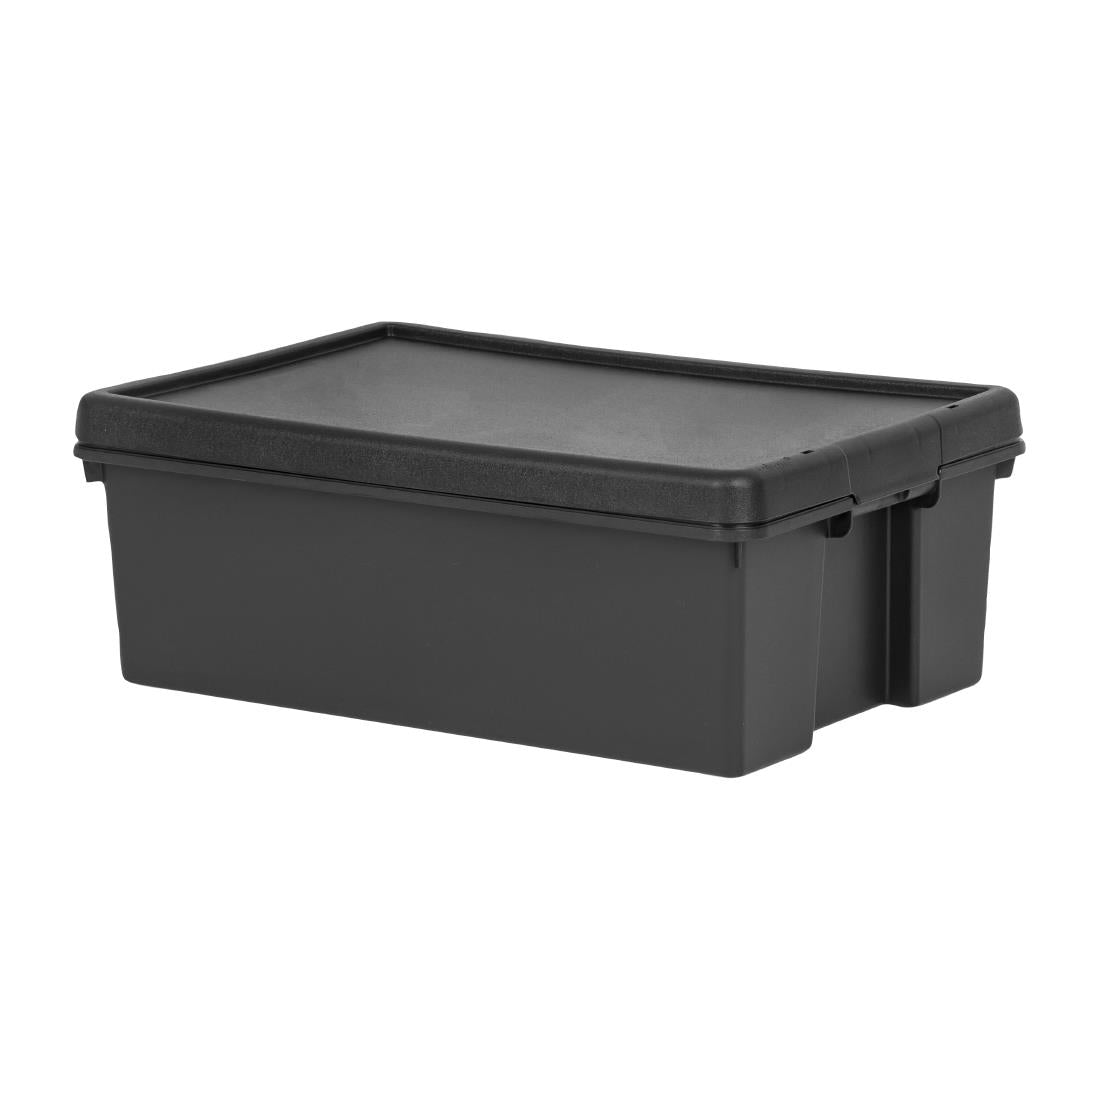 CX092 Wham Bam Recycled Storage Box & Lid Black 36Ltr JD Catering Equipment Solutions Ltd